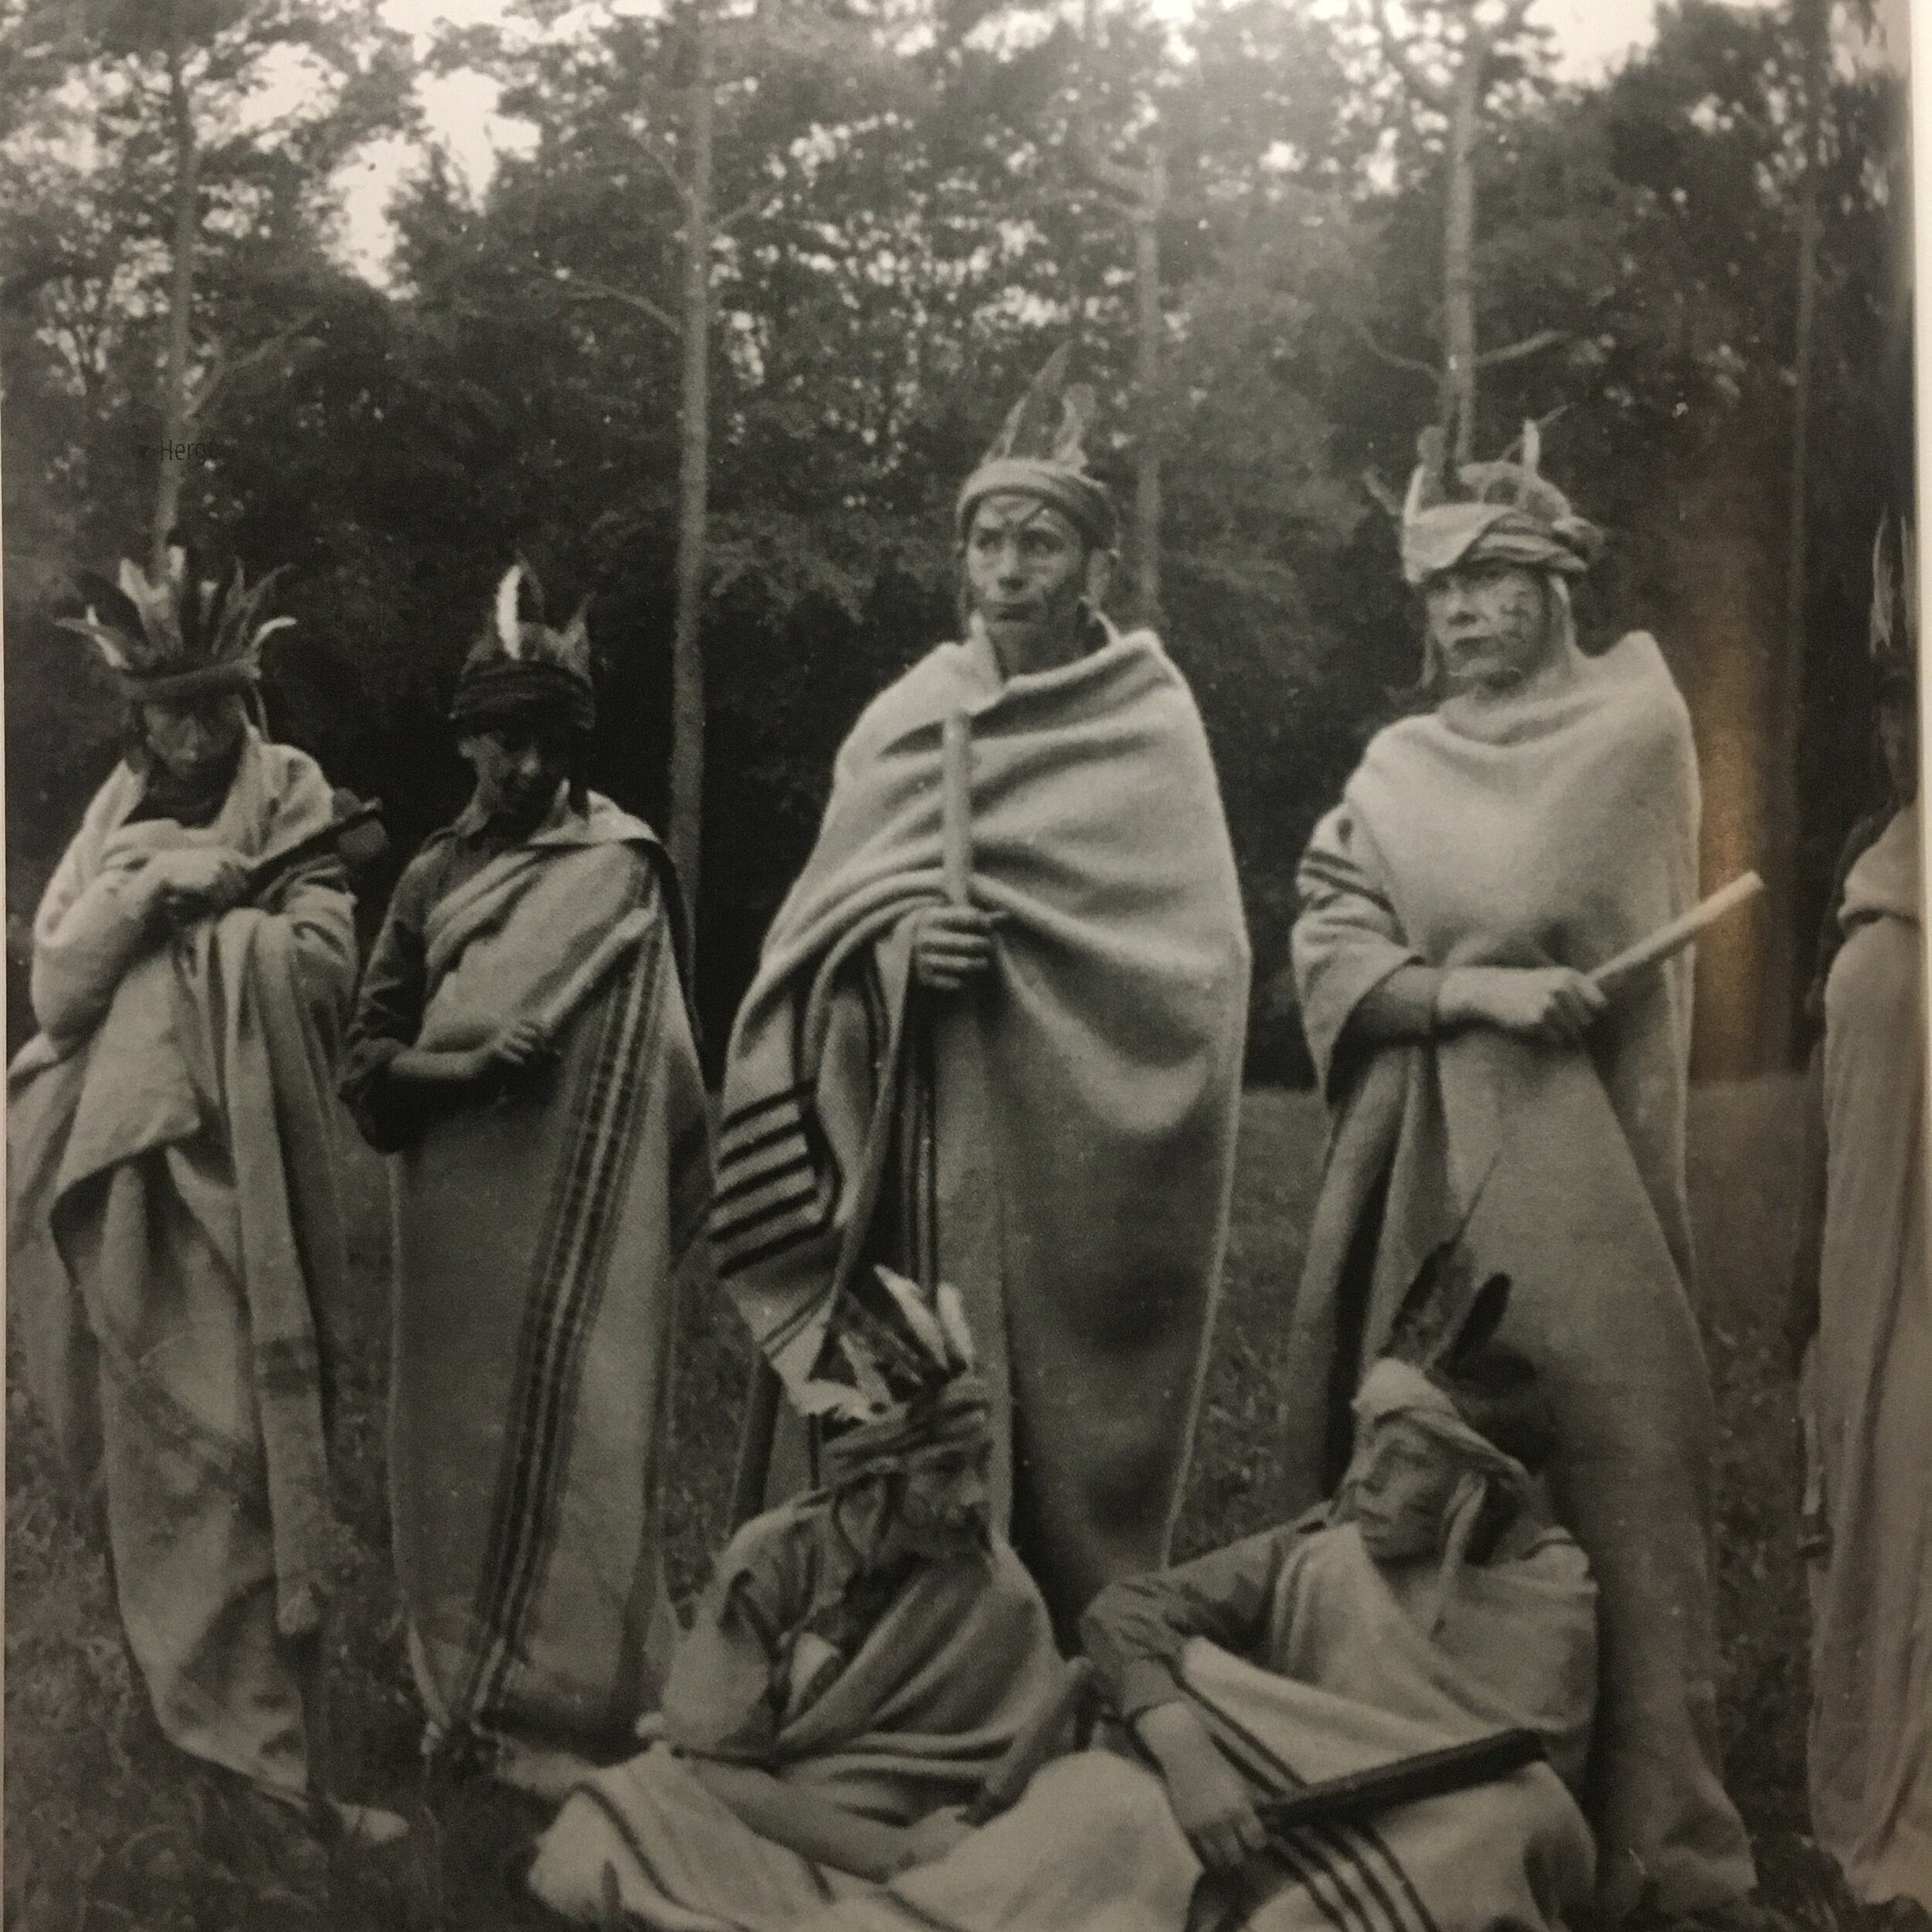  Herge had long-been fascinated by various tribes of the Native Americans. Here is is seen dressed up as members along with the rest of his scout troop on August 1, 1922. (Herge is on the far left).  Daubert, Michel, and Hergé .  Tintin: the Art of 